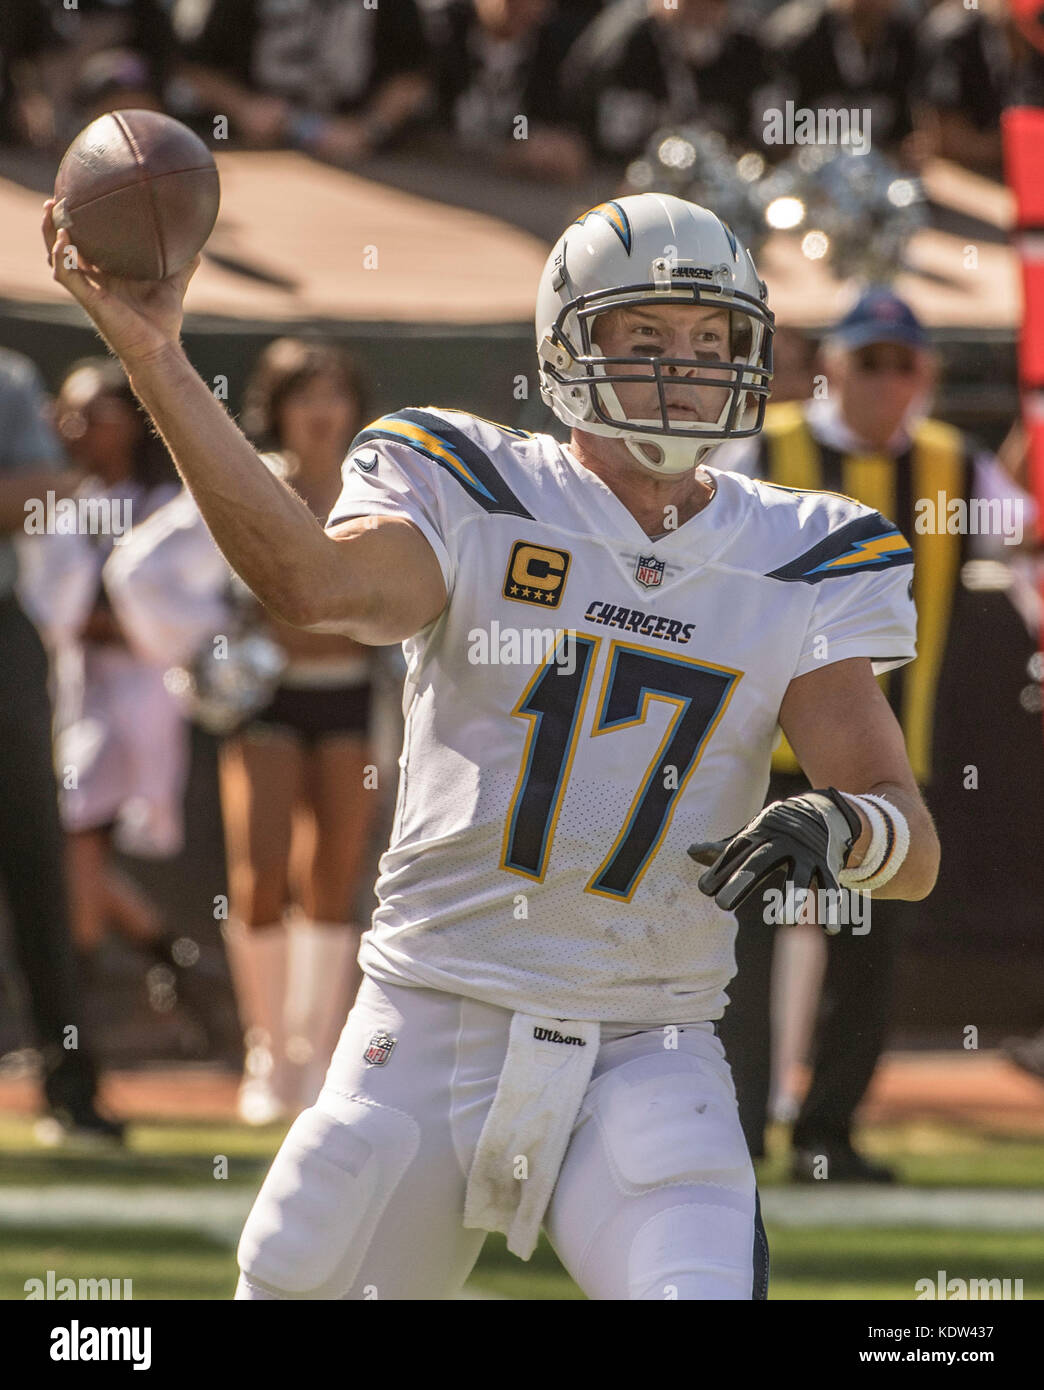 Oakland, California, USA. 15th Oct, 2017. Los Angeles Chargers quarterback Philip Rivers (17) fires pass downfield on Sunday, October 15, 2017, at Oakland-Alameda County Coliseum in Oakland, California. The Chargers defeated the Raiders 17-16. Al Golub/CSM/Alamy Live News Stock Photo